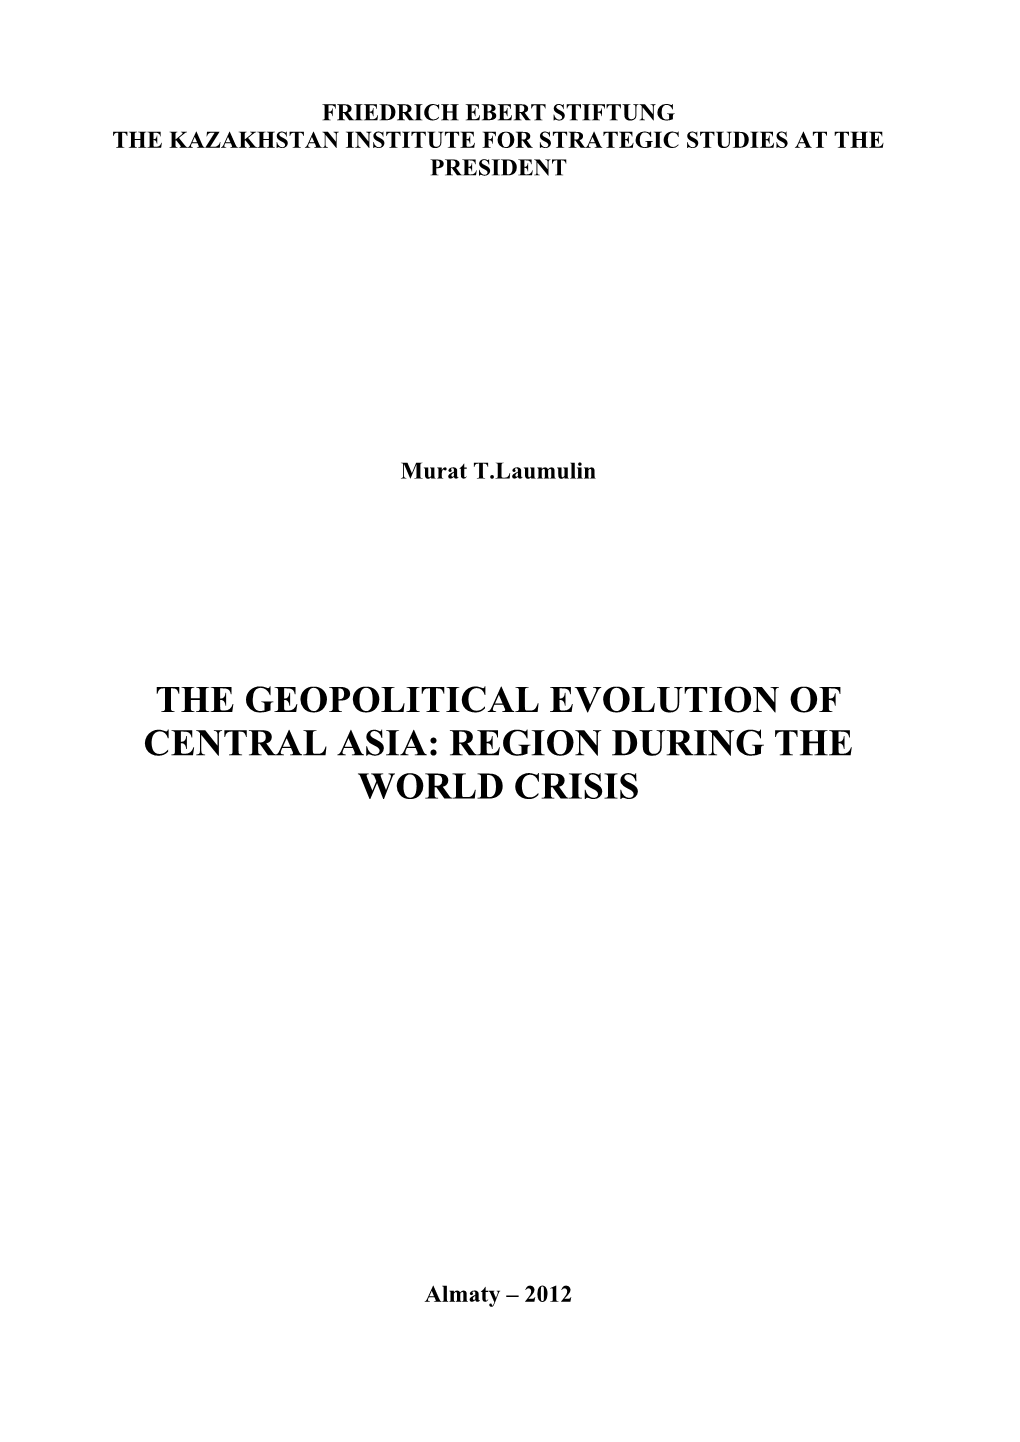 The Geopolitical Evolution of Central Asia: Region During the World Crisis